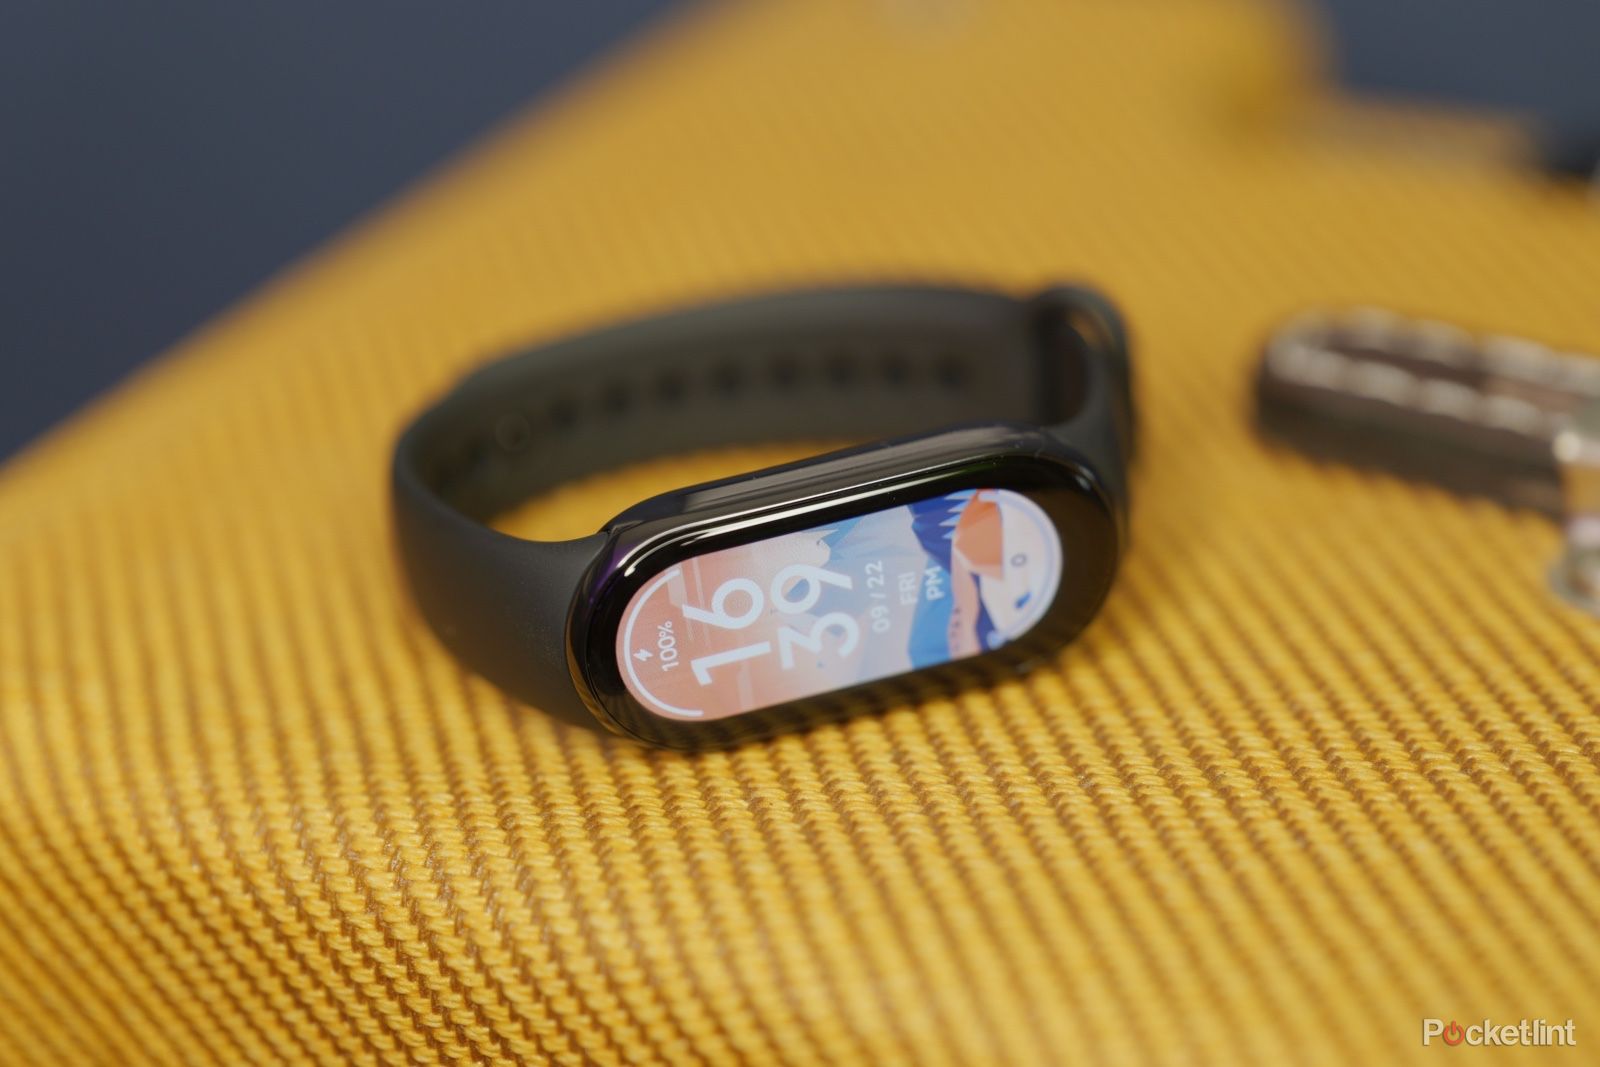 Great Value Fitness Tracker!  Xiaomi Smart Band 8 